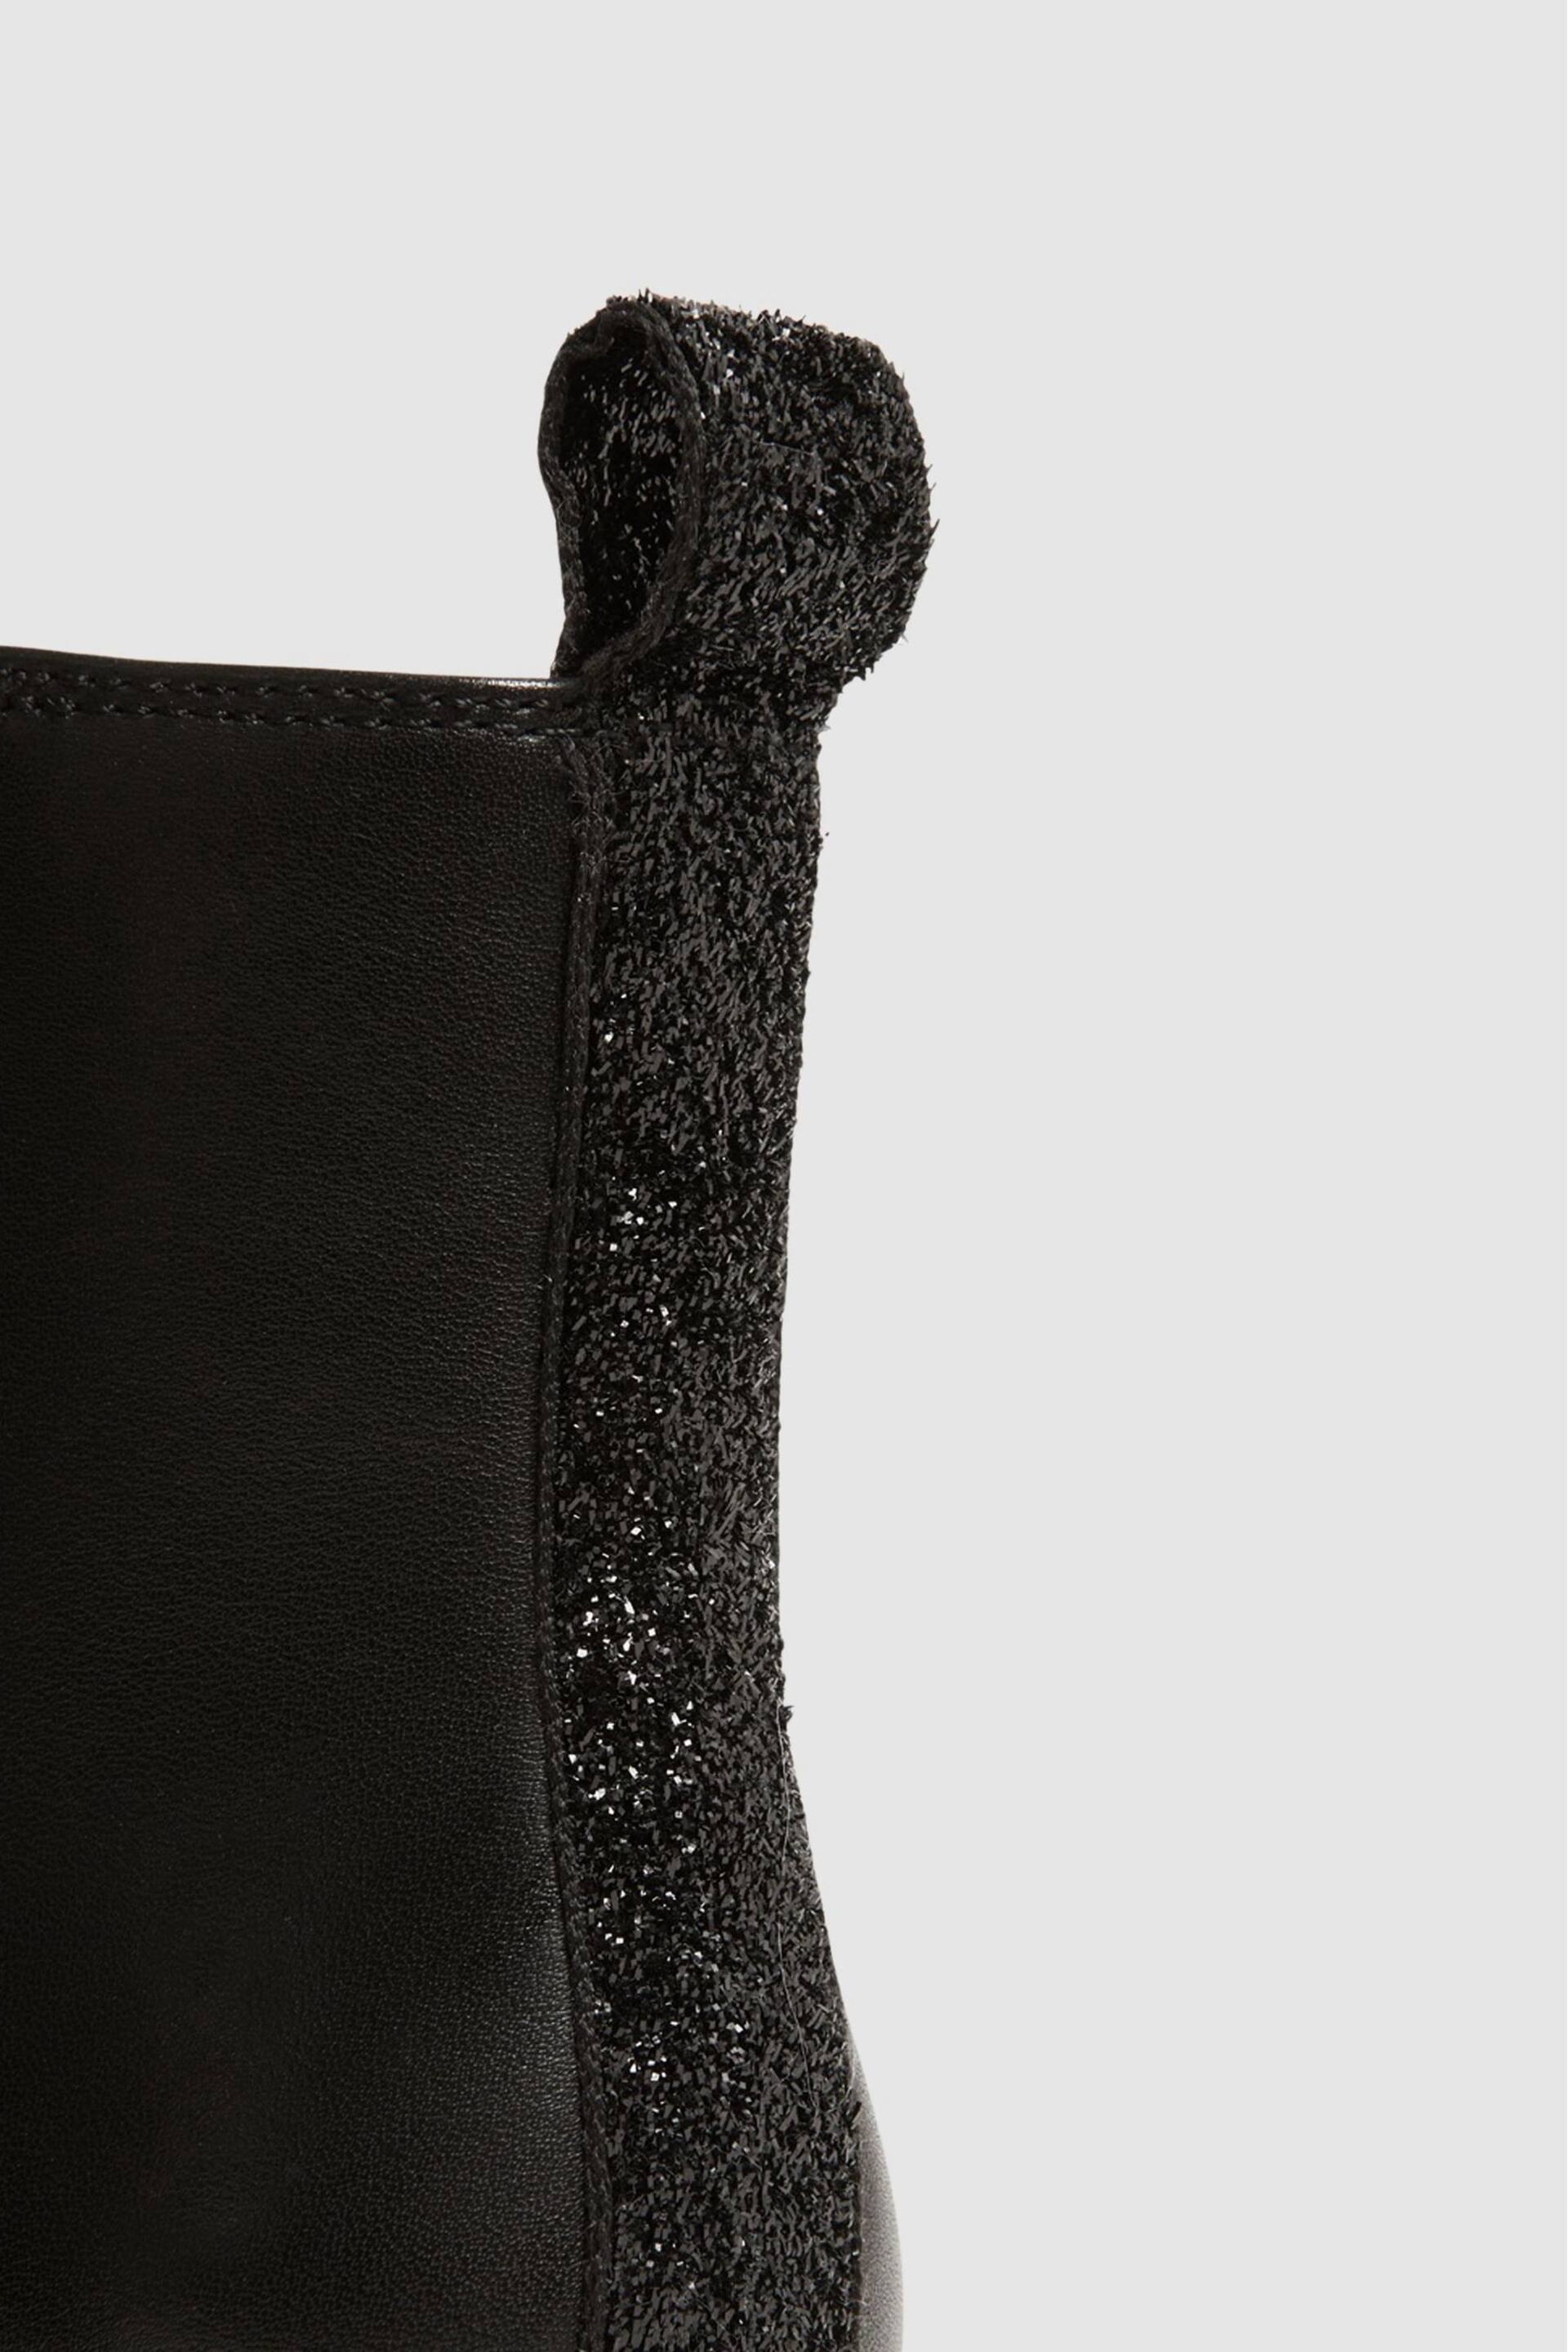 Reiss Black Mia Leather Sparkle Chelsea Boots - Image 5 of 5